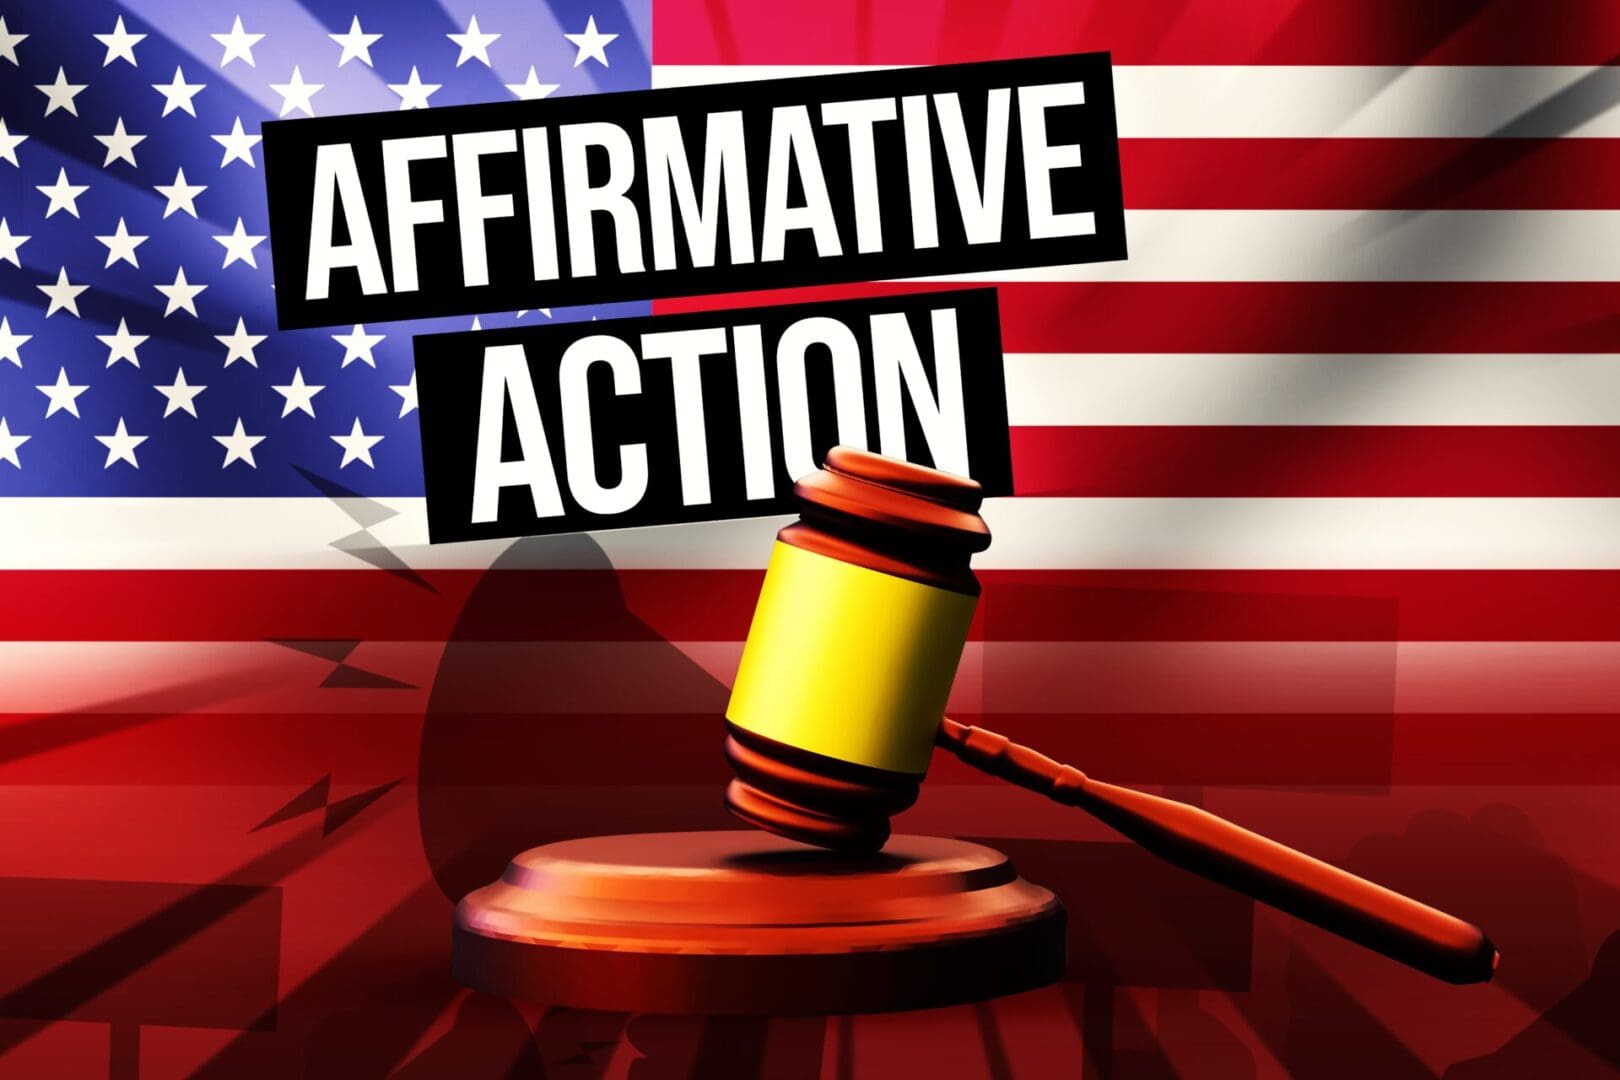 Affirmative,Action,Supreme,Court,Ruling,Concept,Background,With,Gavel,And